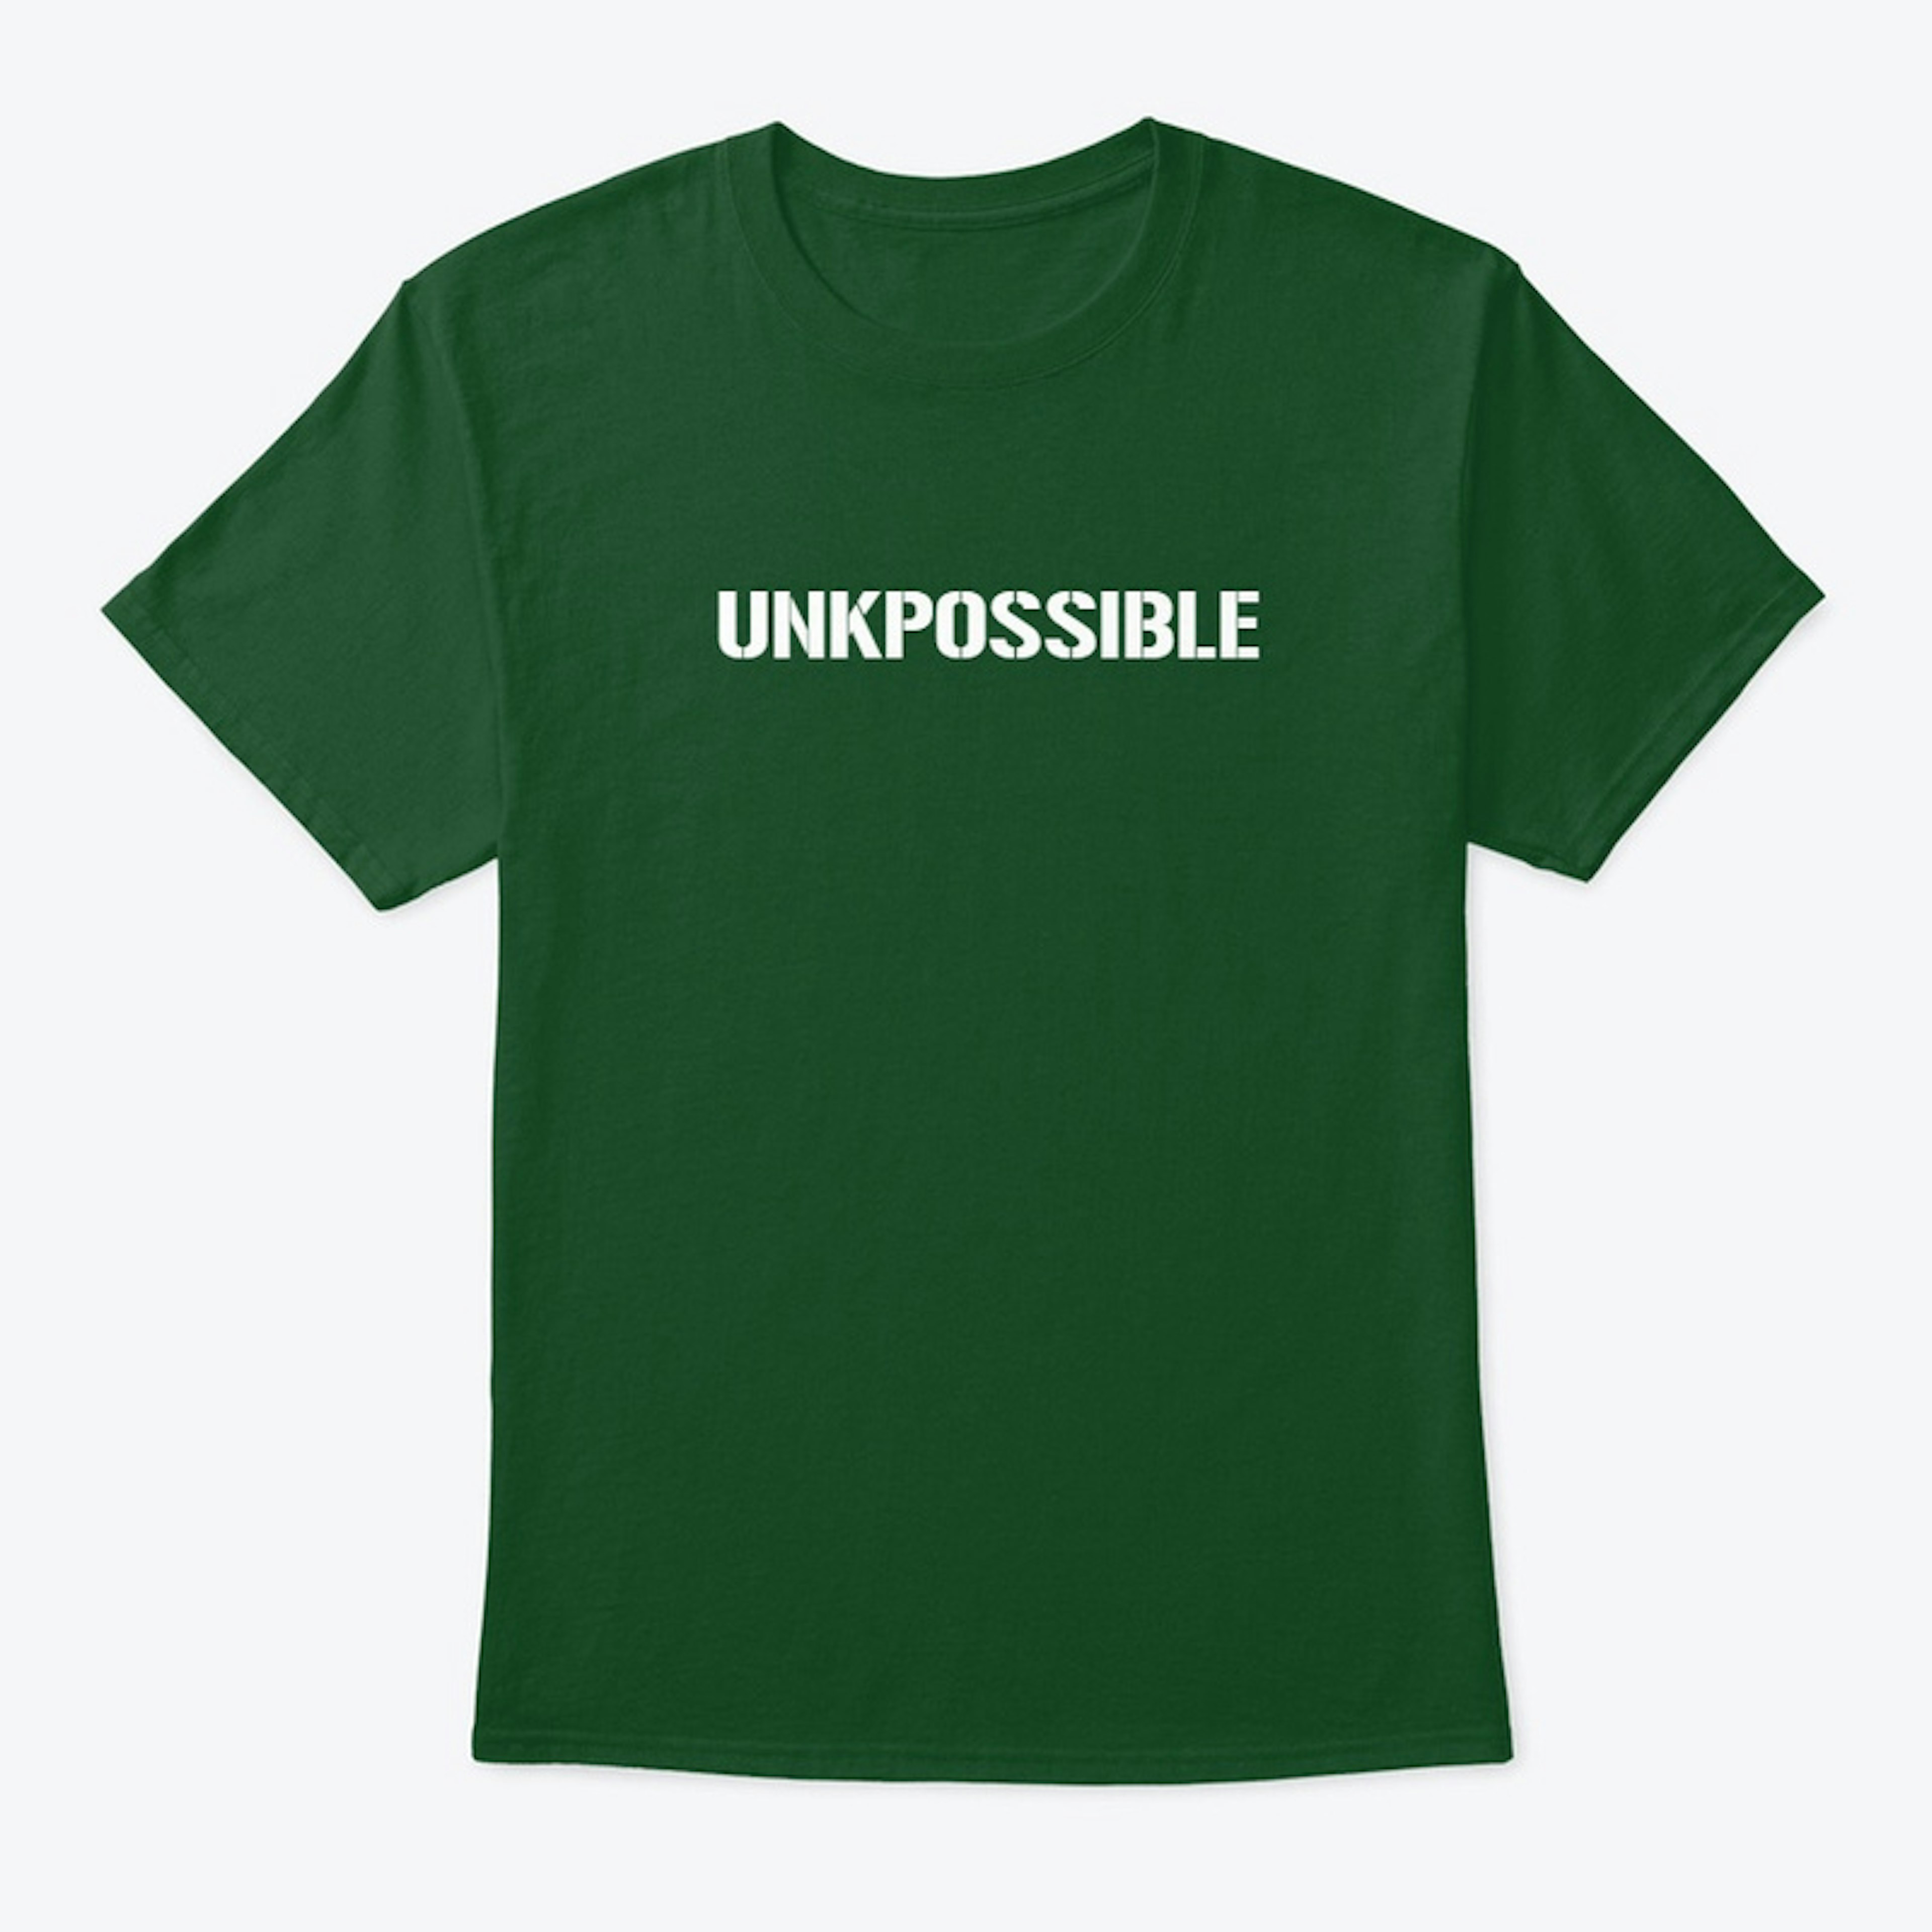 UNKPOSSIBLE Tee (Pick a Color)